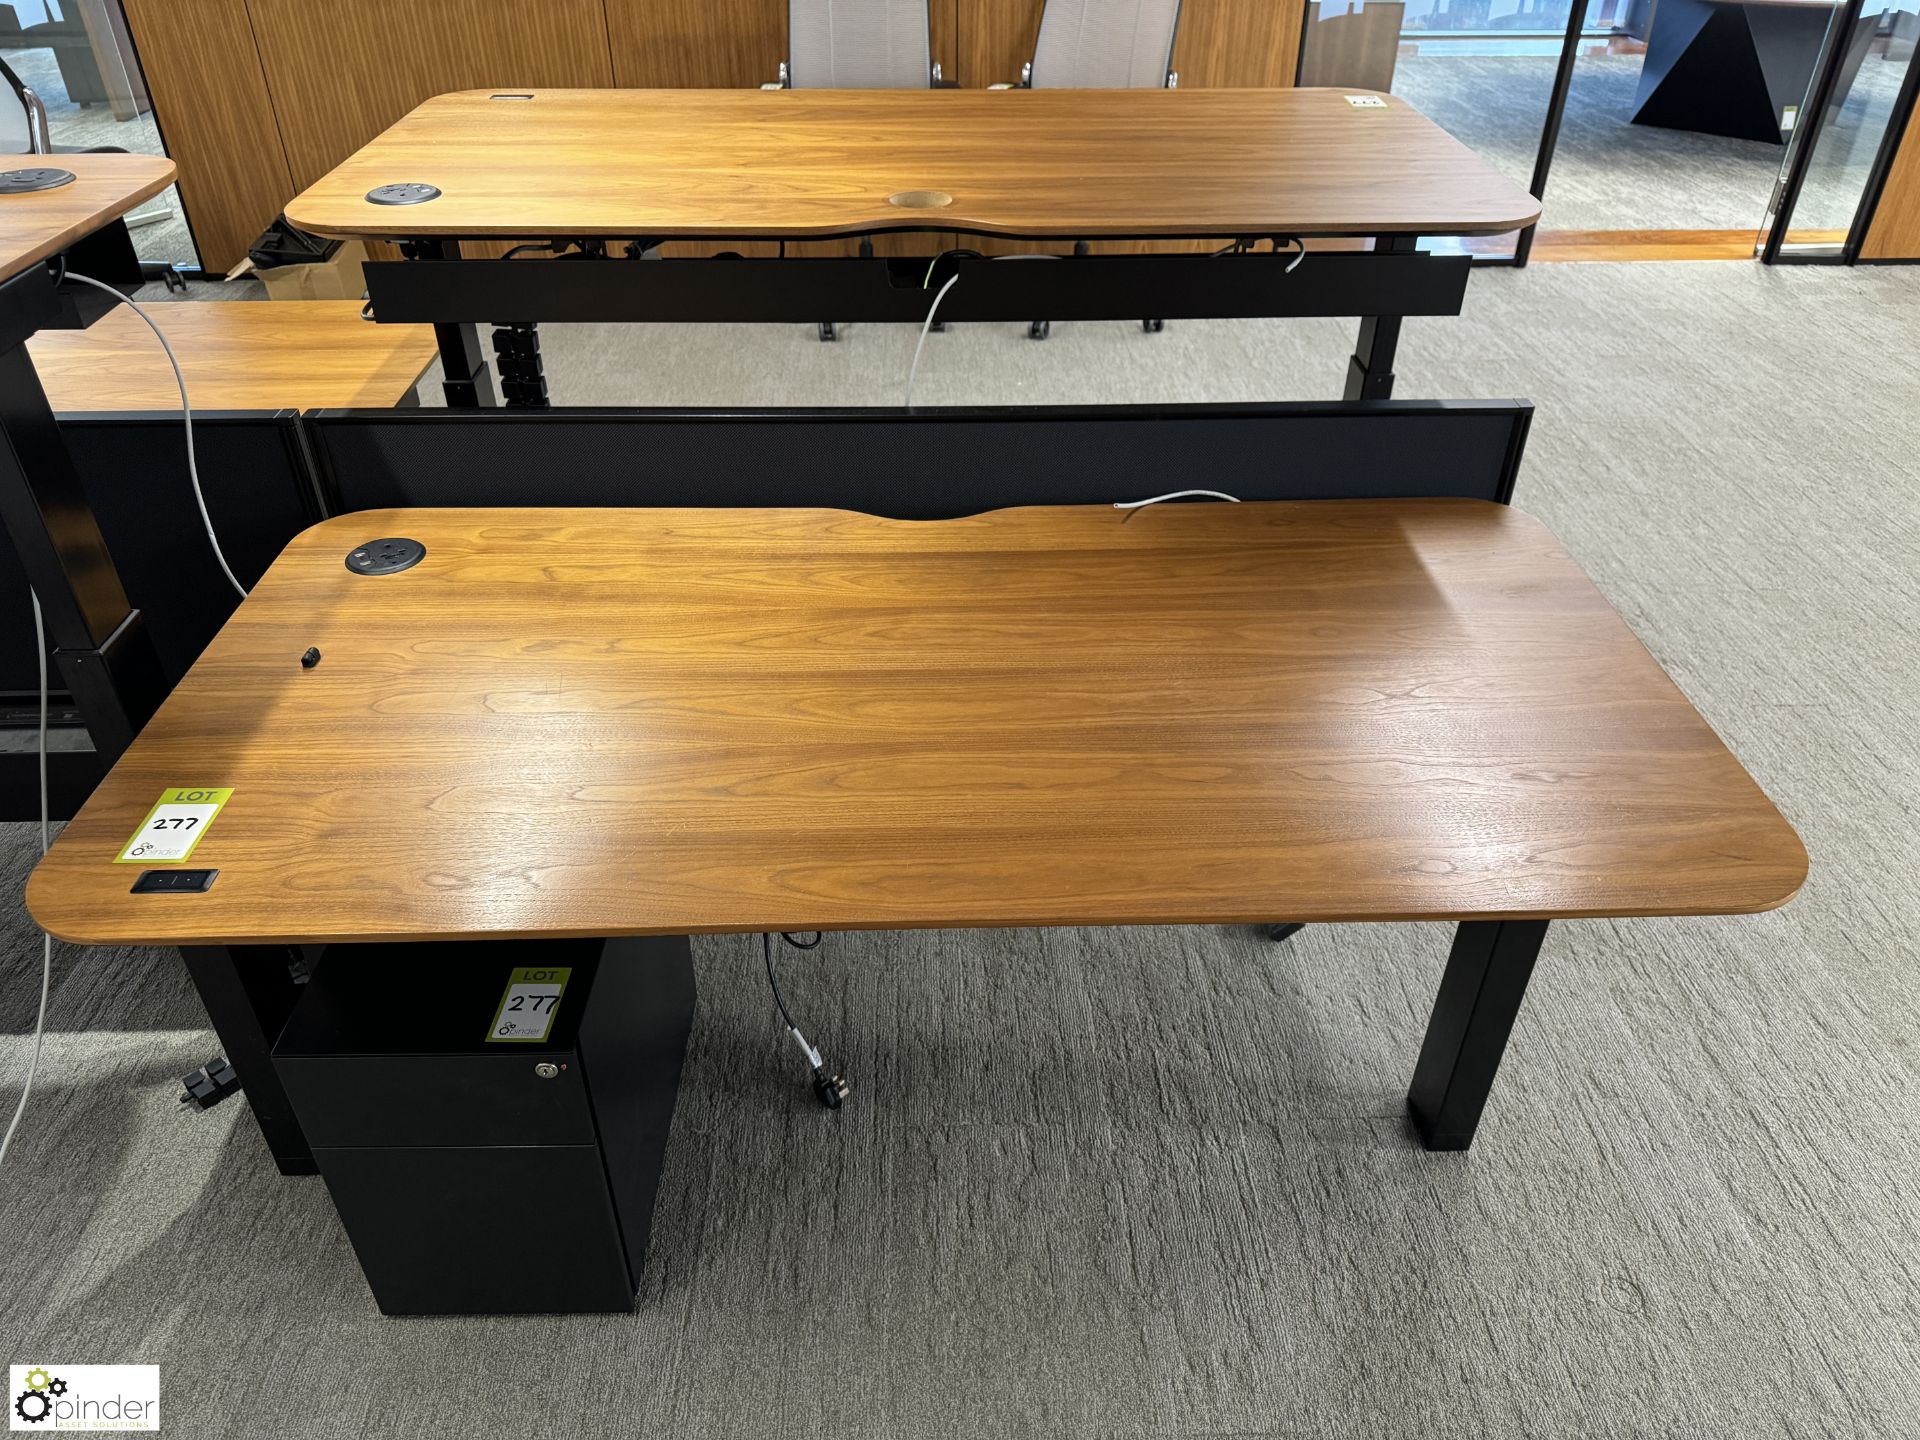 OMT back to back powered rise and fall Desks, 1600mm x 800mm per desk leaf, cherry veneer, with - Image 3 of 6